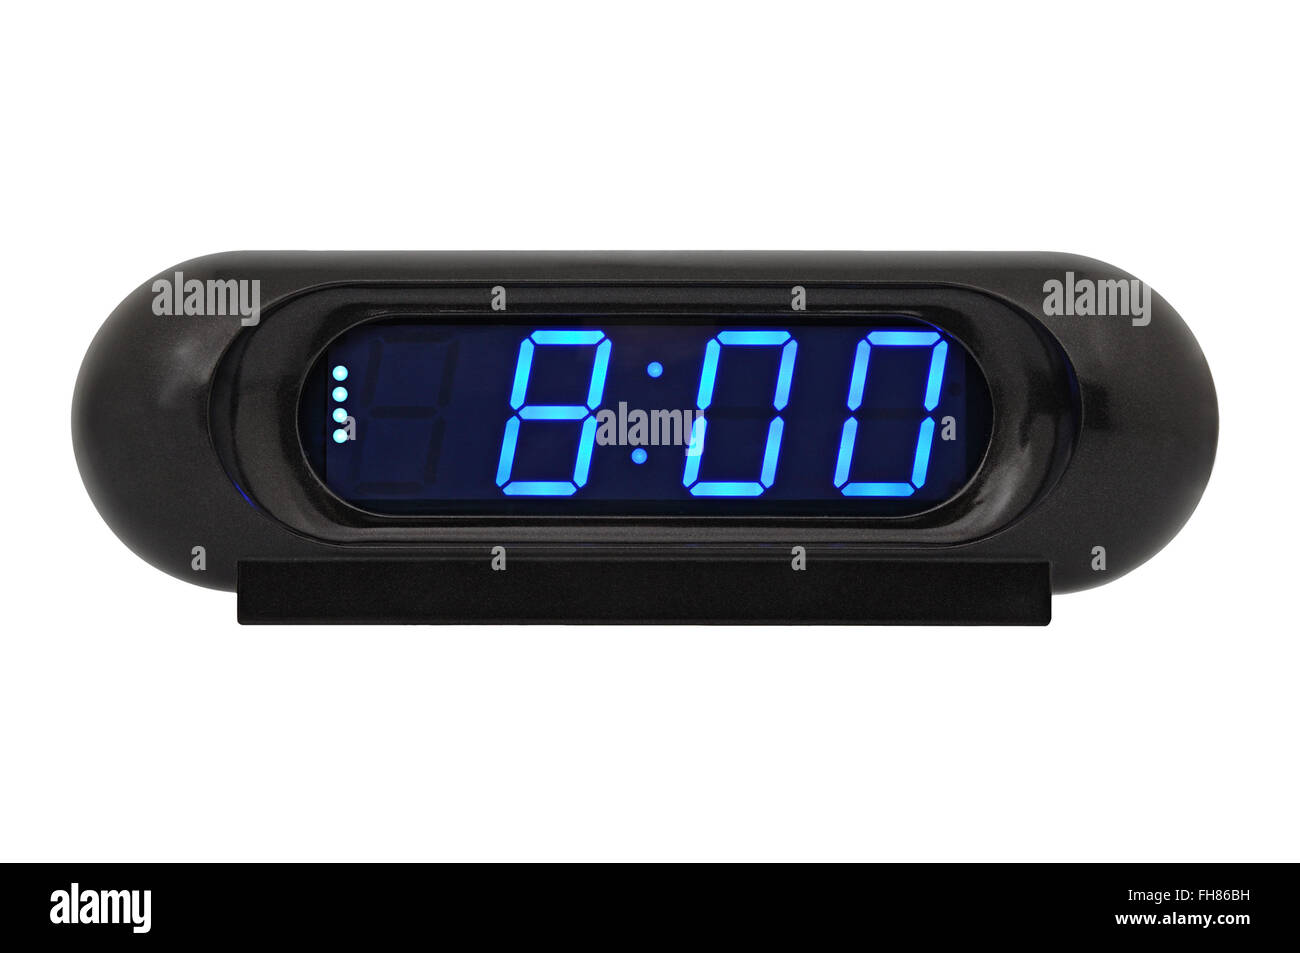 Desktop electronic clock display shows the time 8:00 isolated on a white background Stock Photo